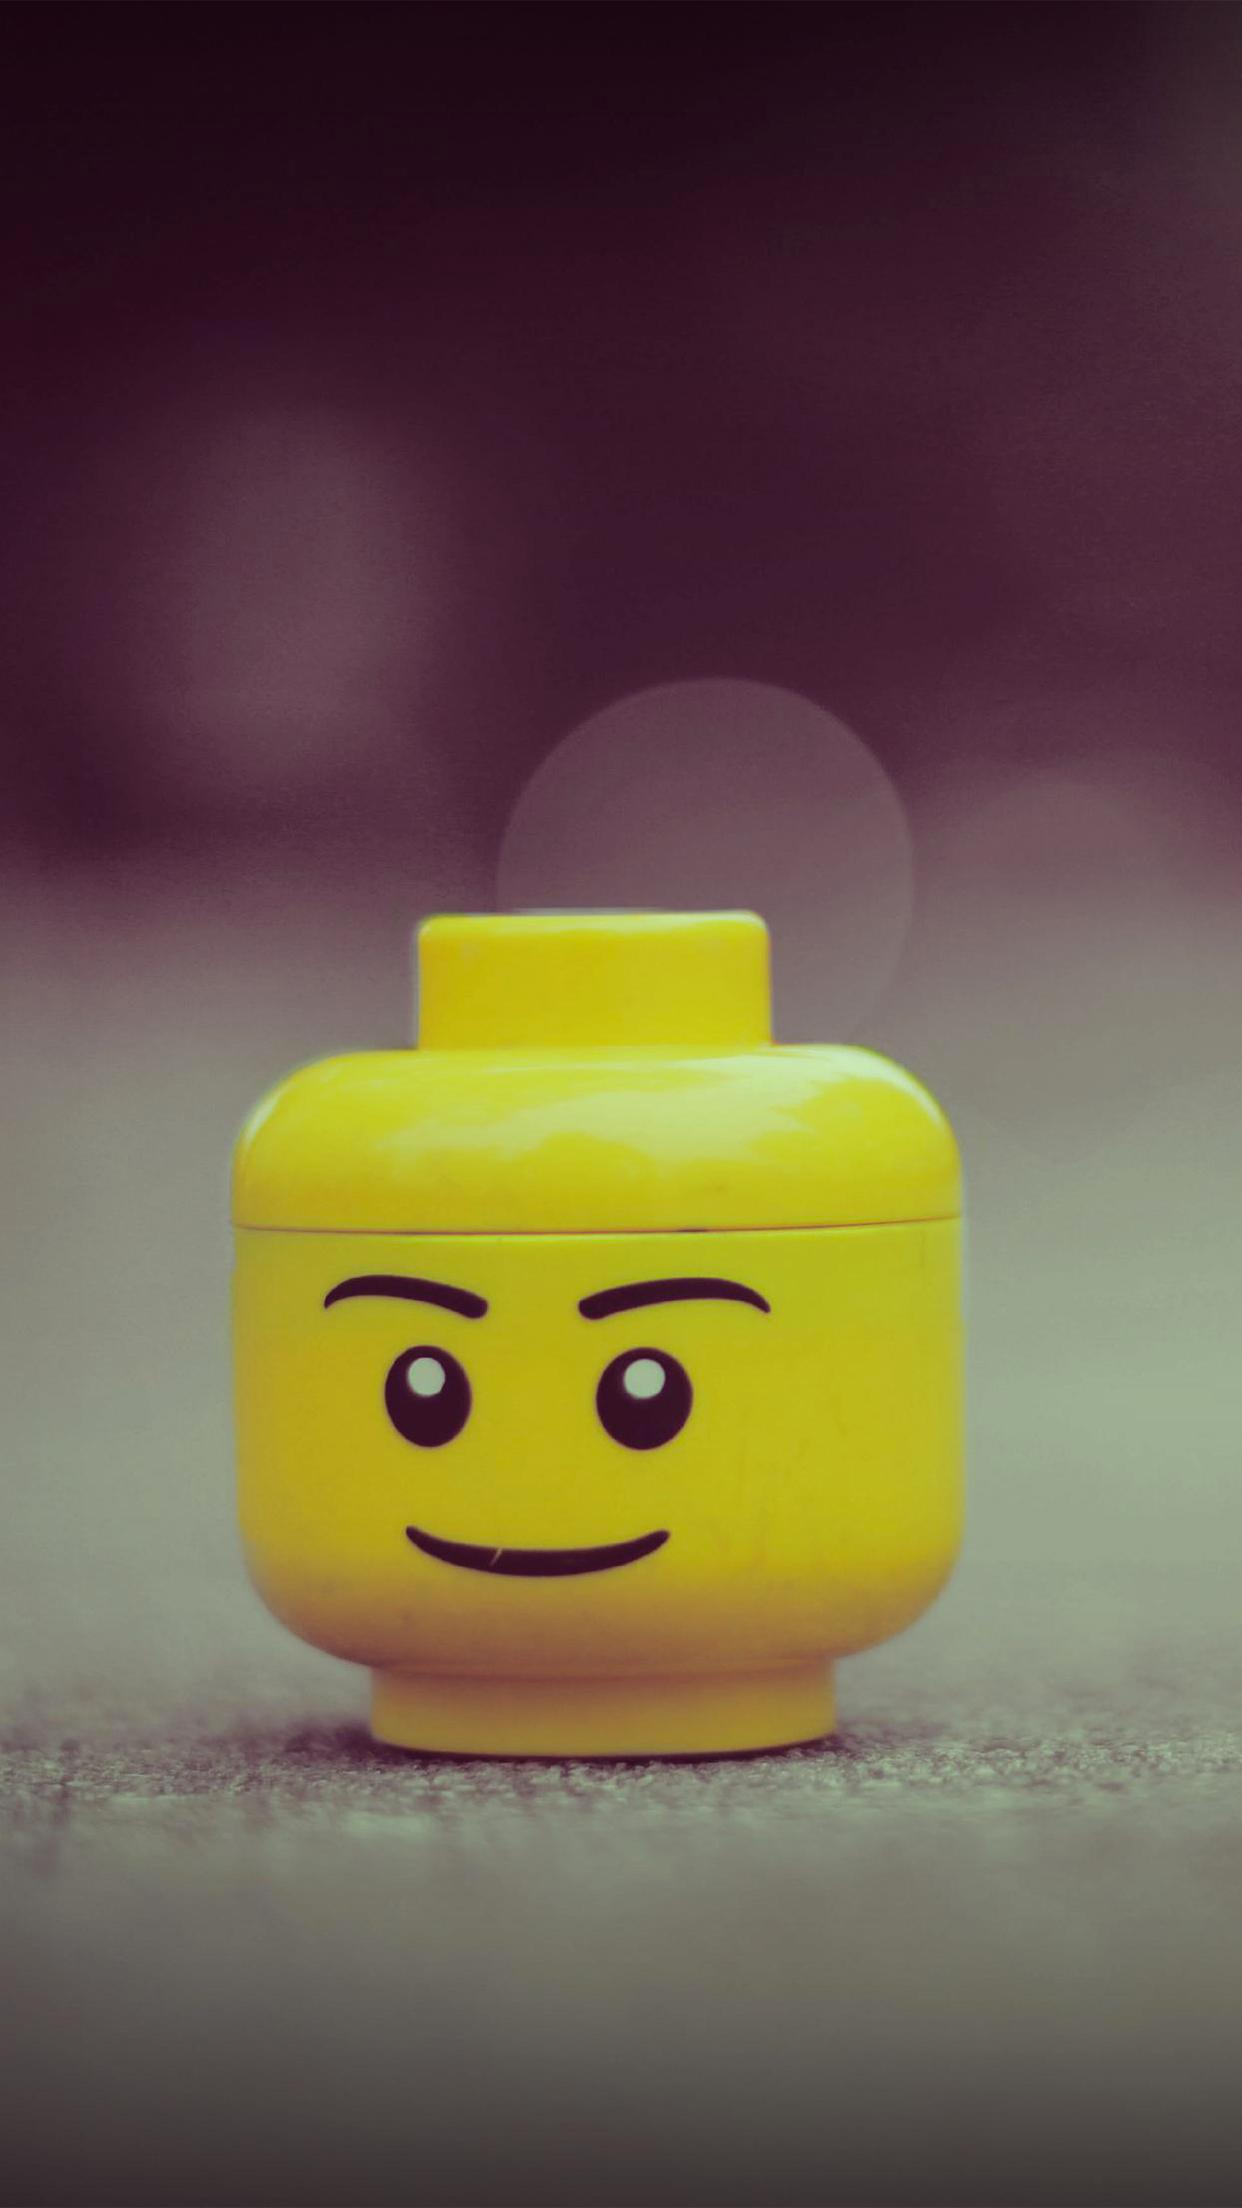 Lego head Wallpaper for iPhone X, 6